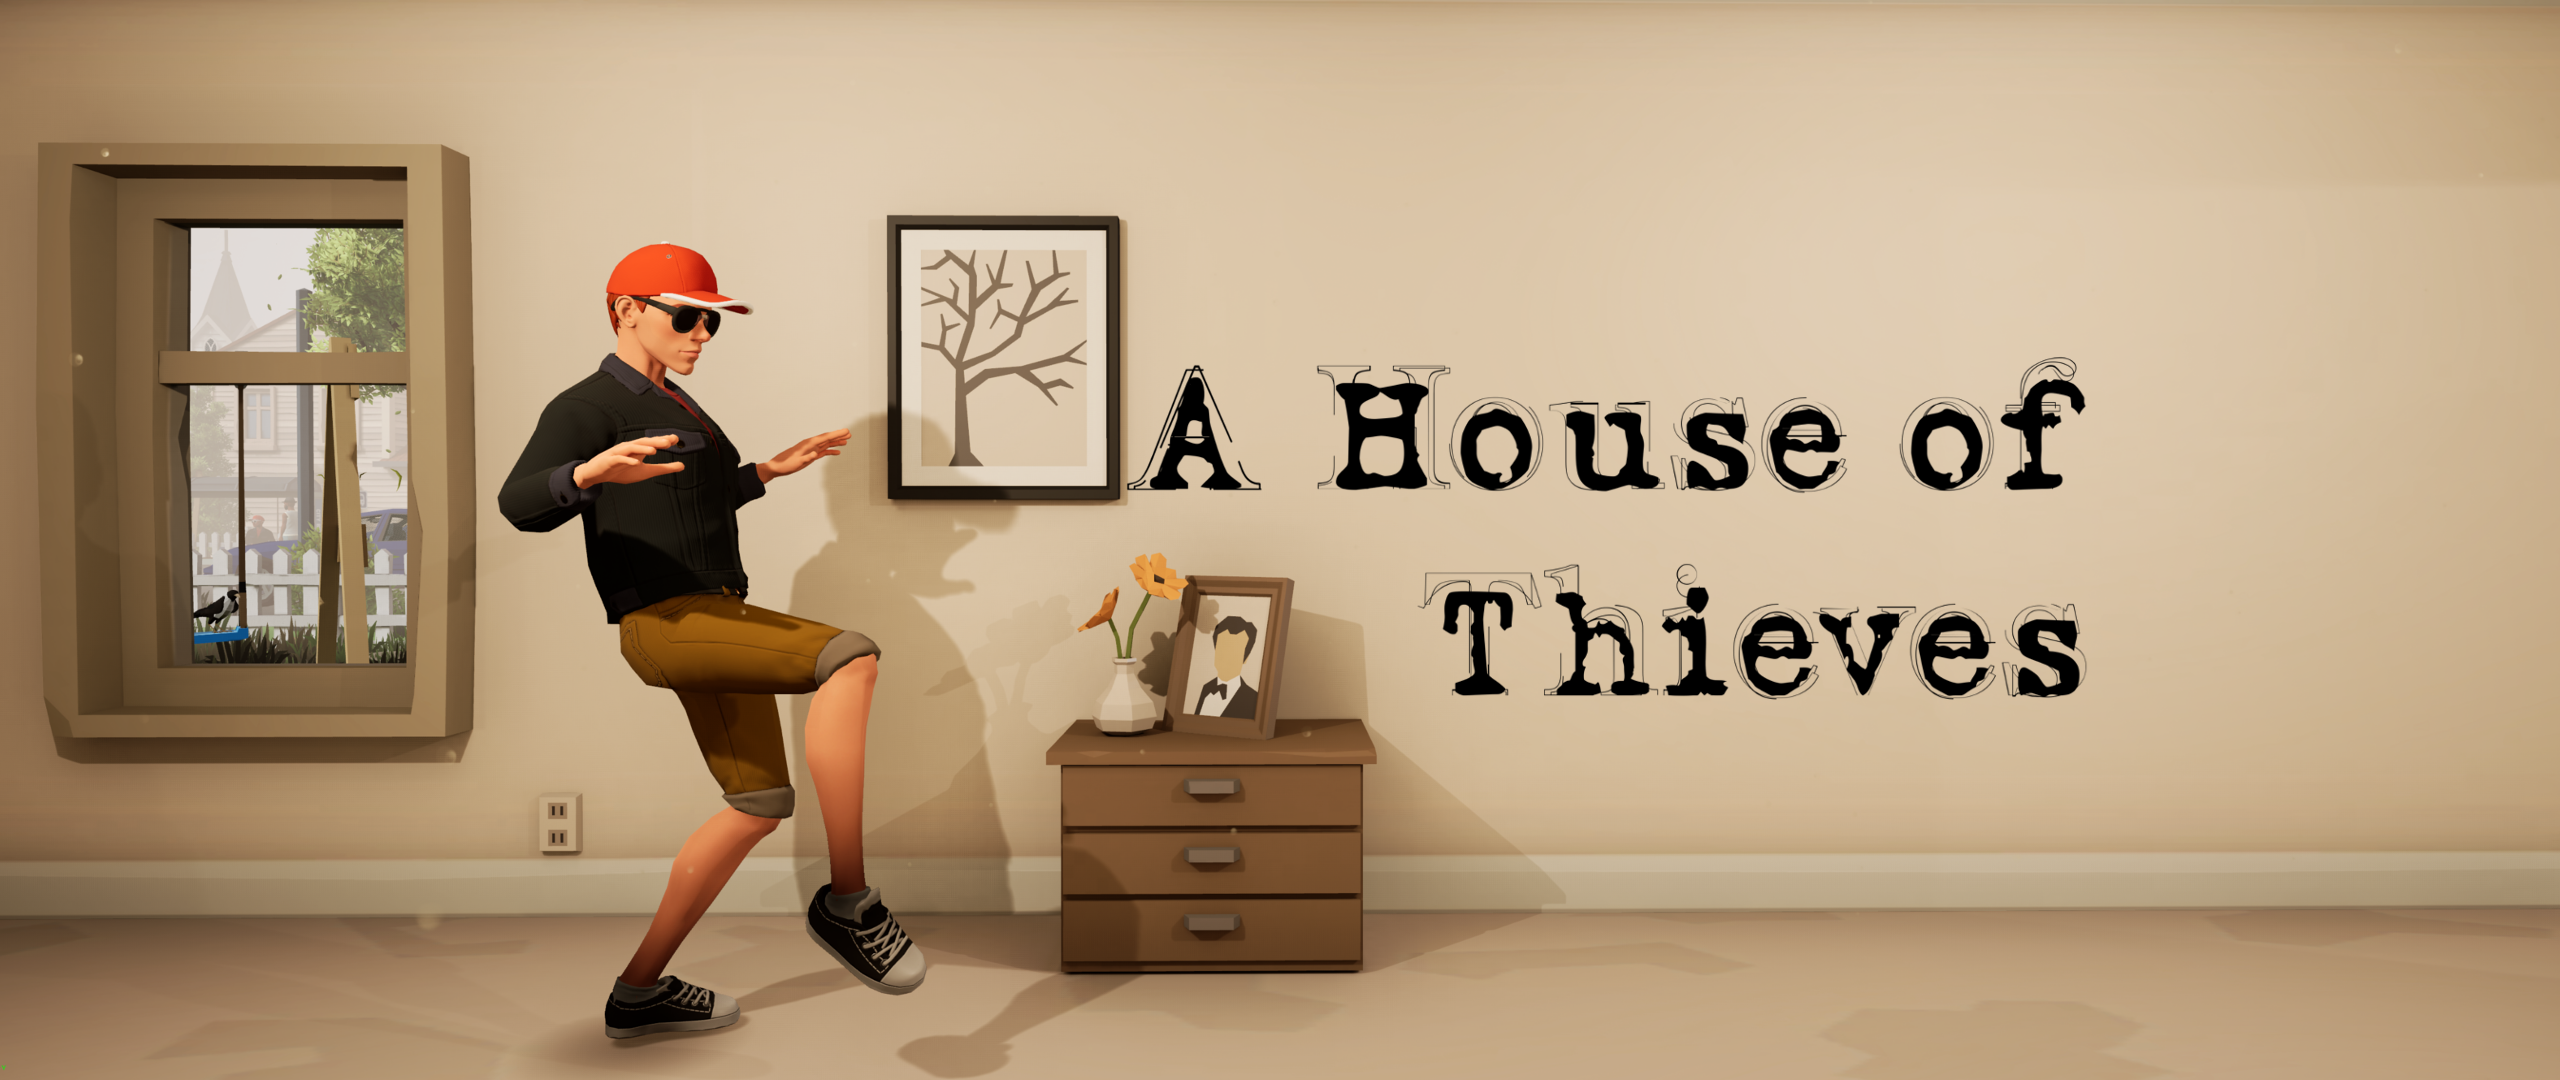 A House of Thieves